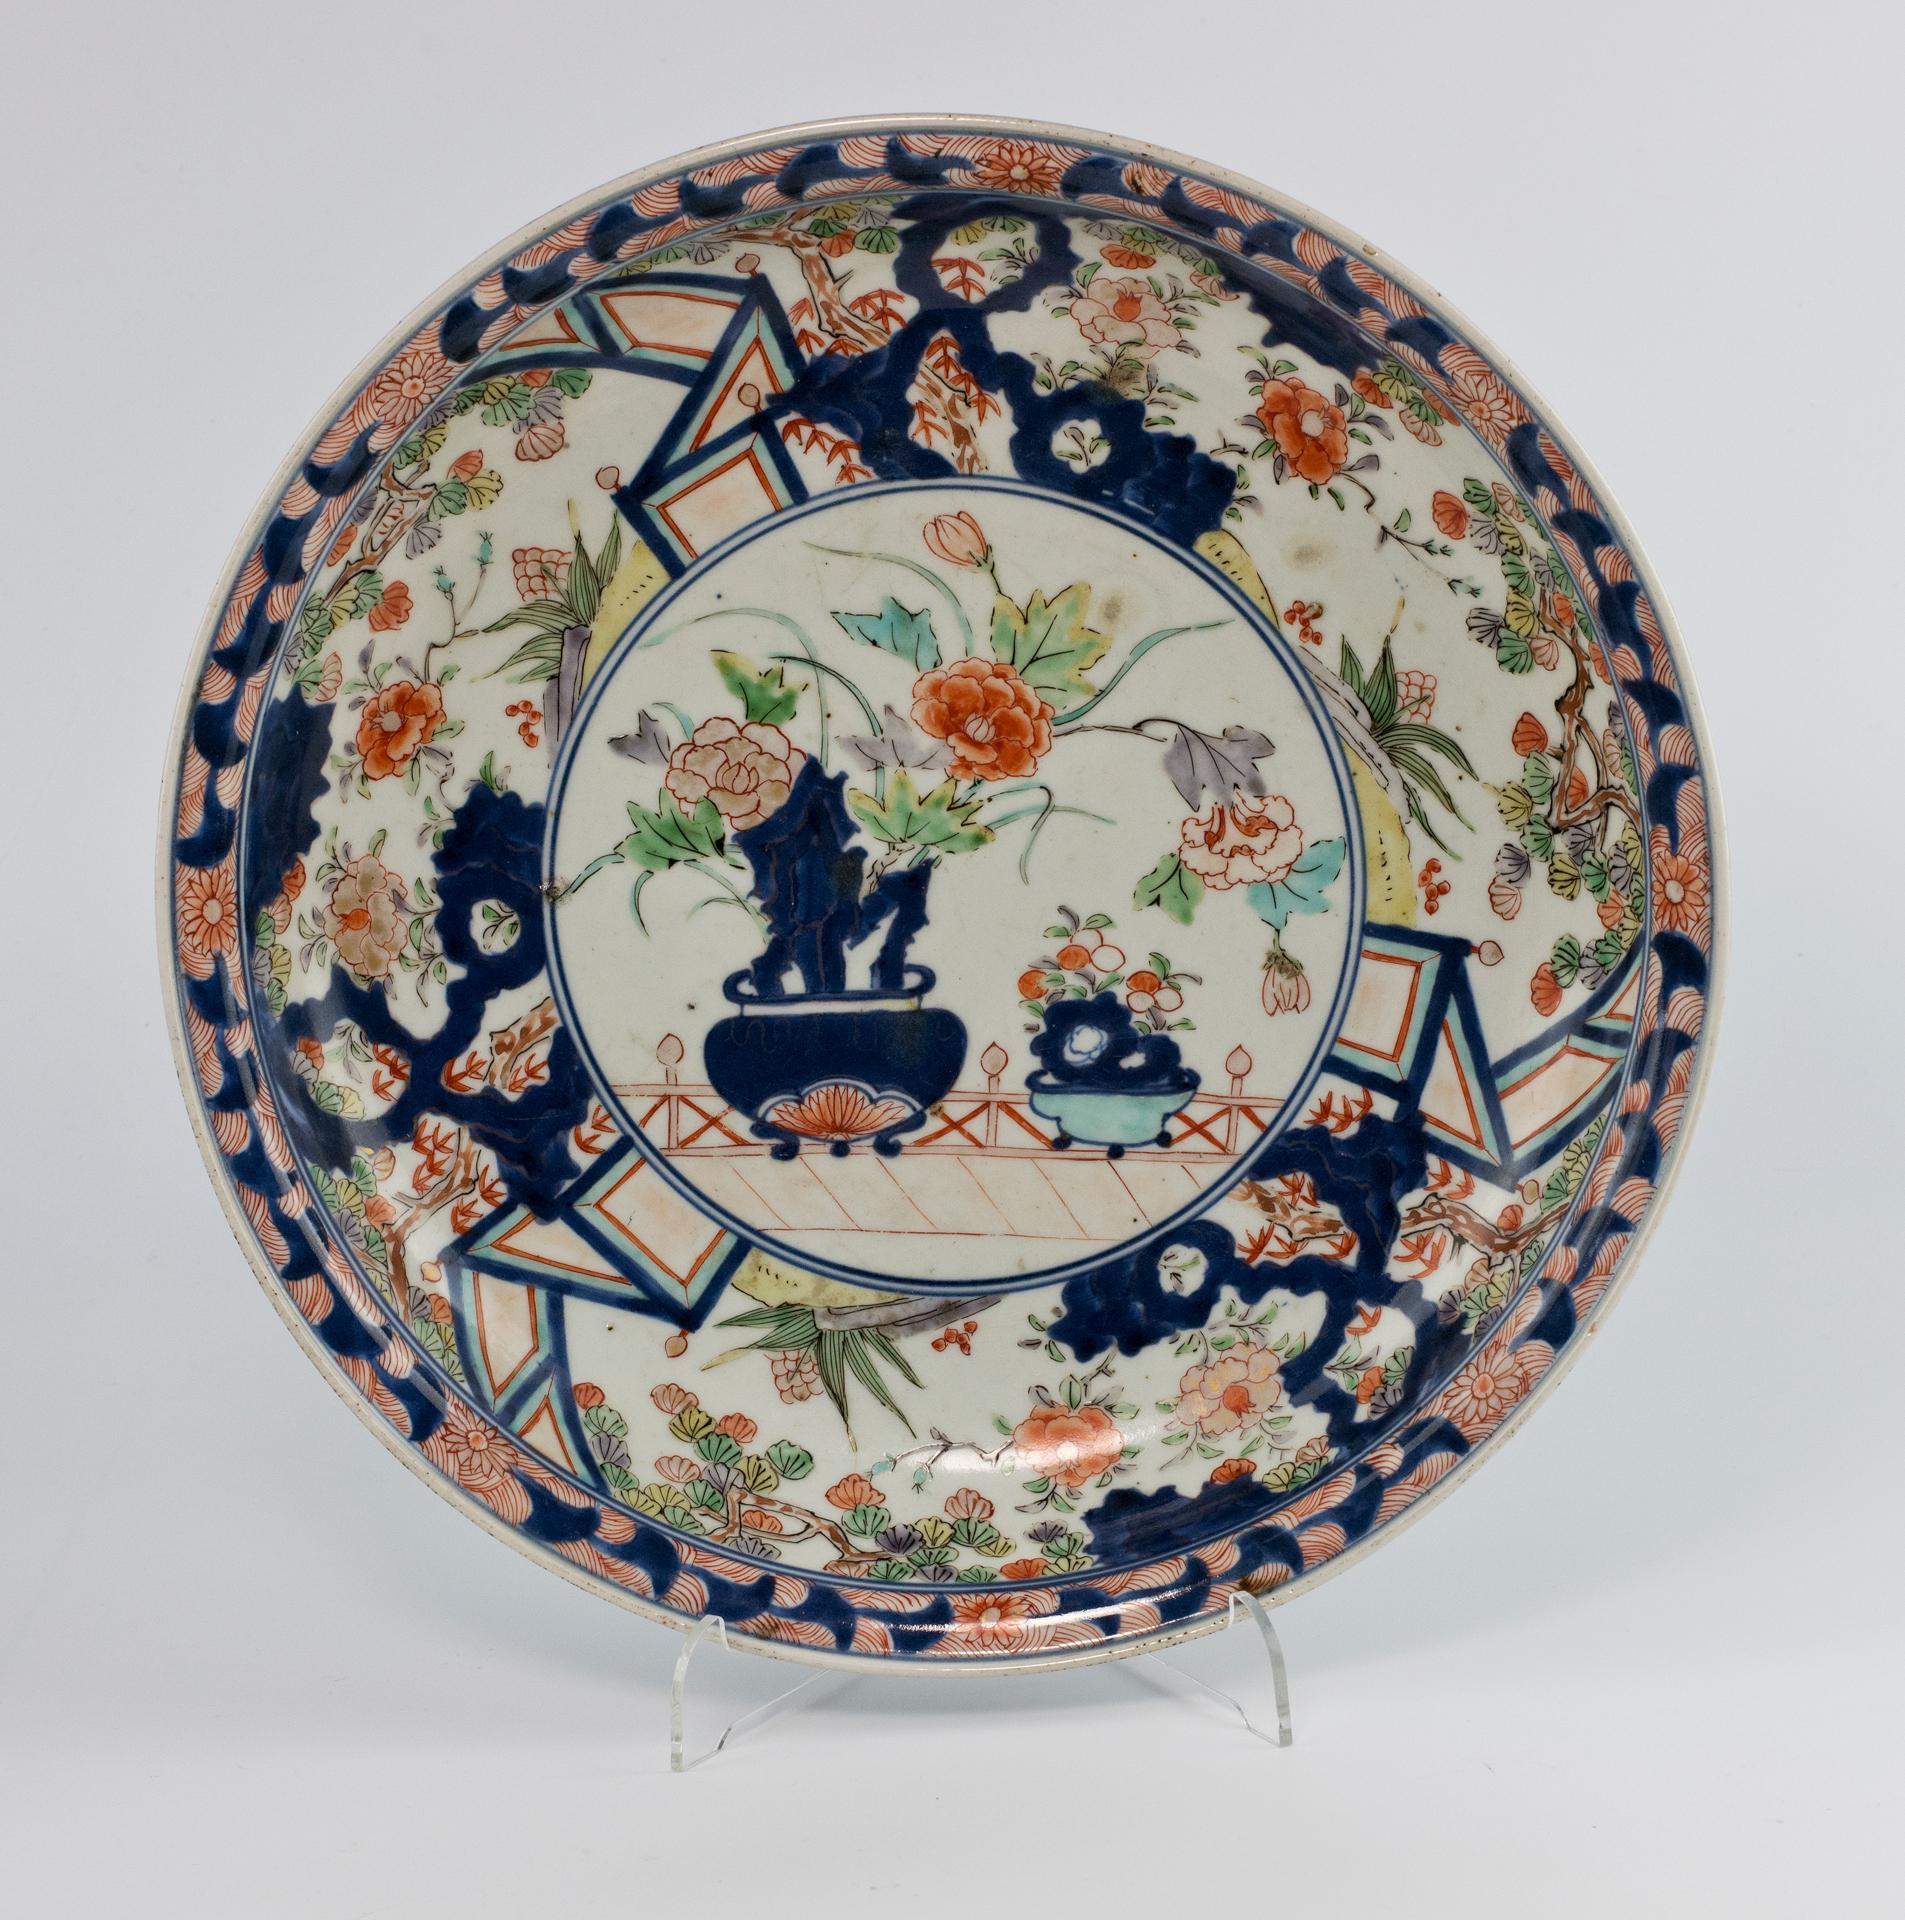 As part of our Japanese works of art collection we are delighted to offer this fine pair of Edo Period 1612-1868, manufactured in the Arita kilns during the Genroku Period 1688-1704, the dishes are painted in typical Imari palette with the